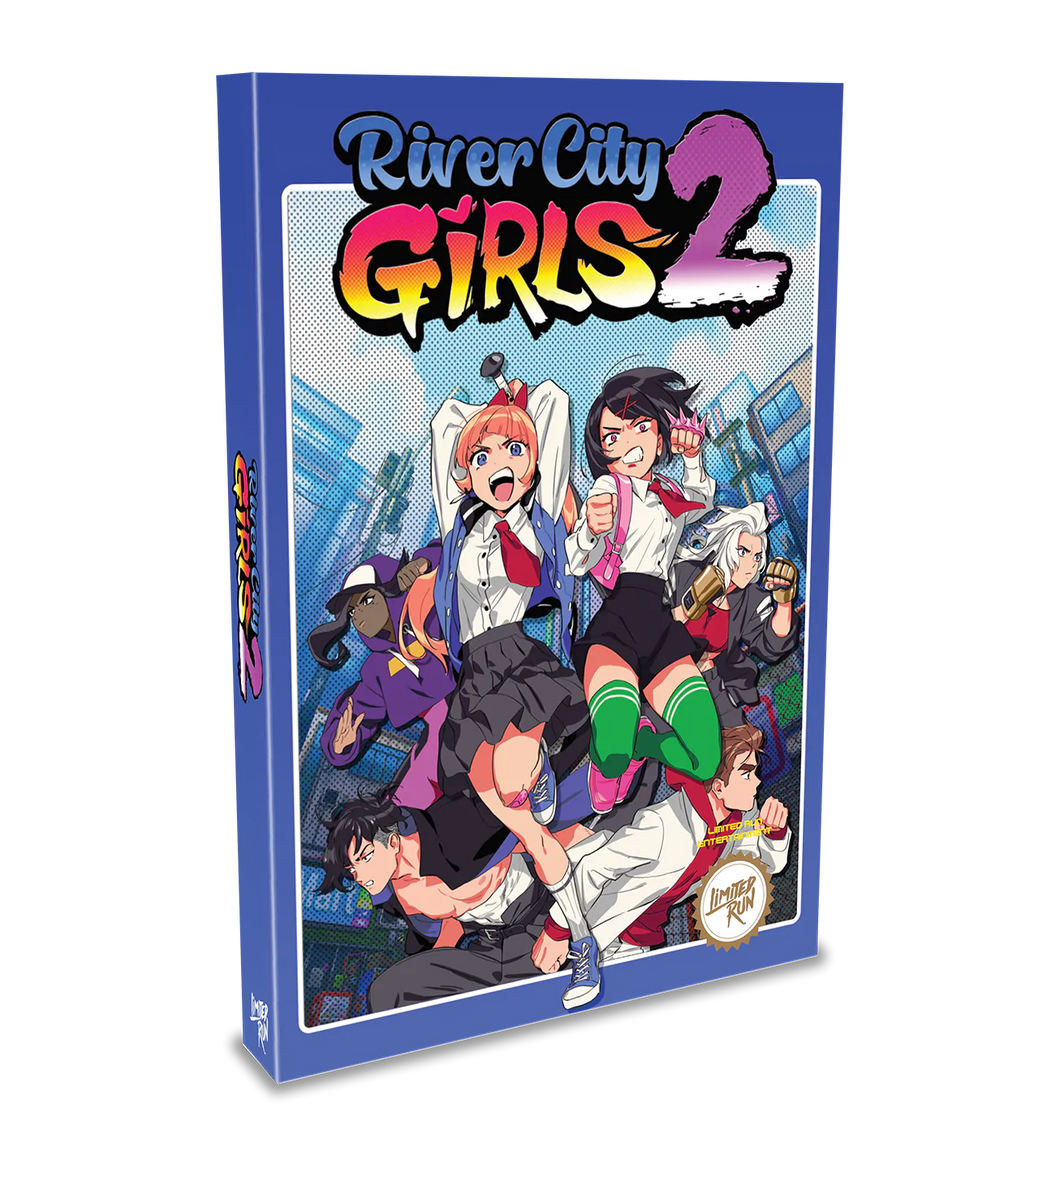 PS5 LIMITED RUN #34: RIVER CITY GIRLS 2 CLASSIC EDITION